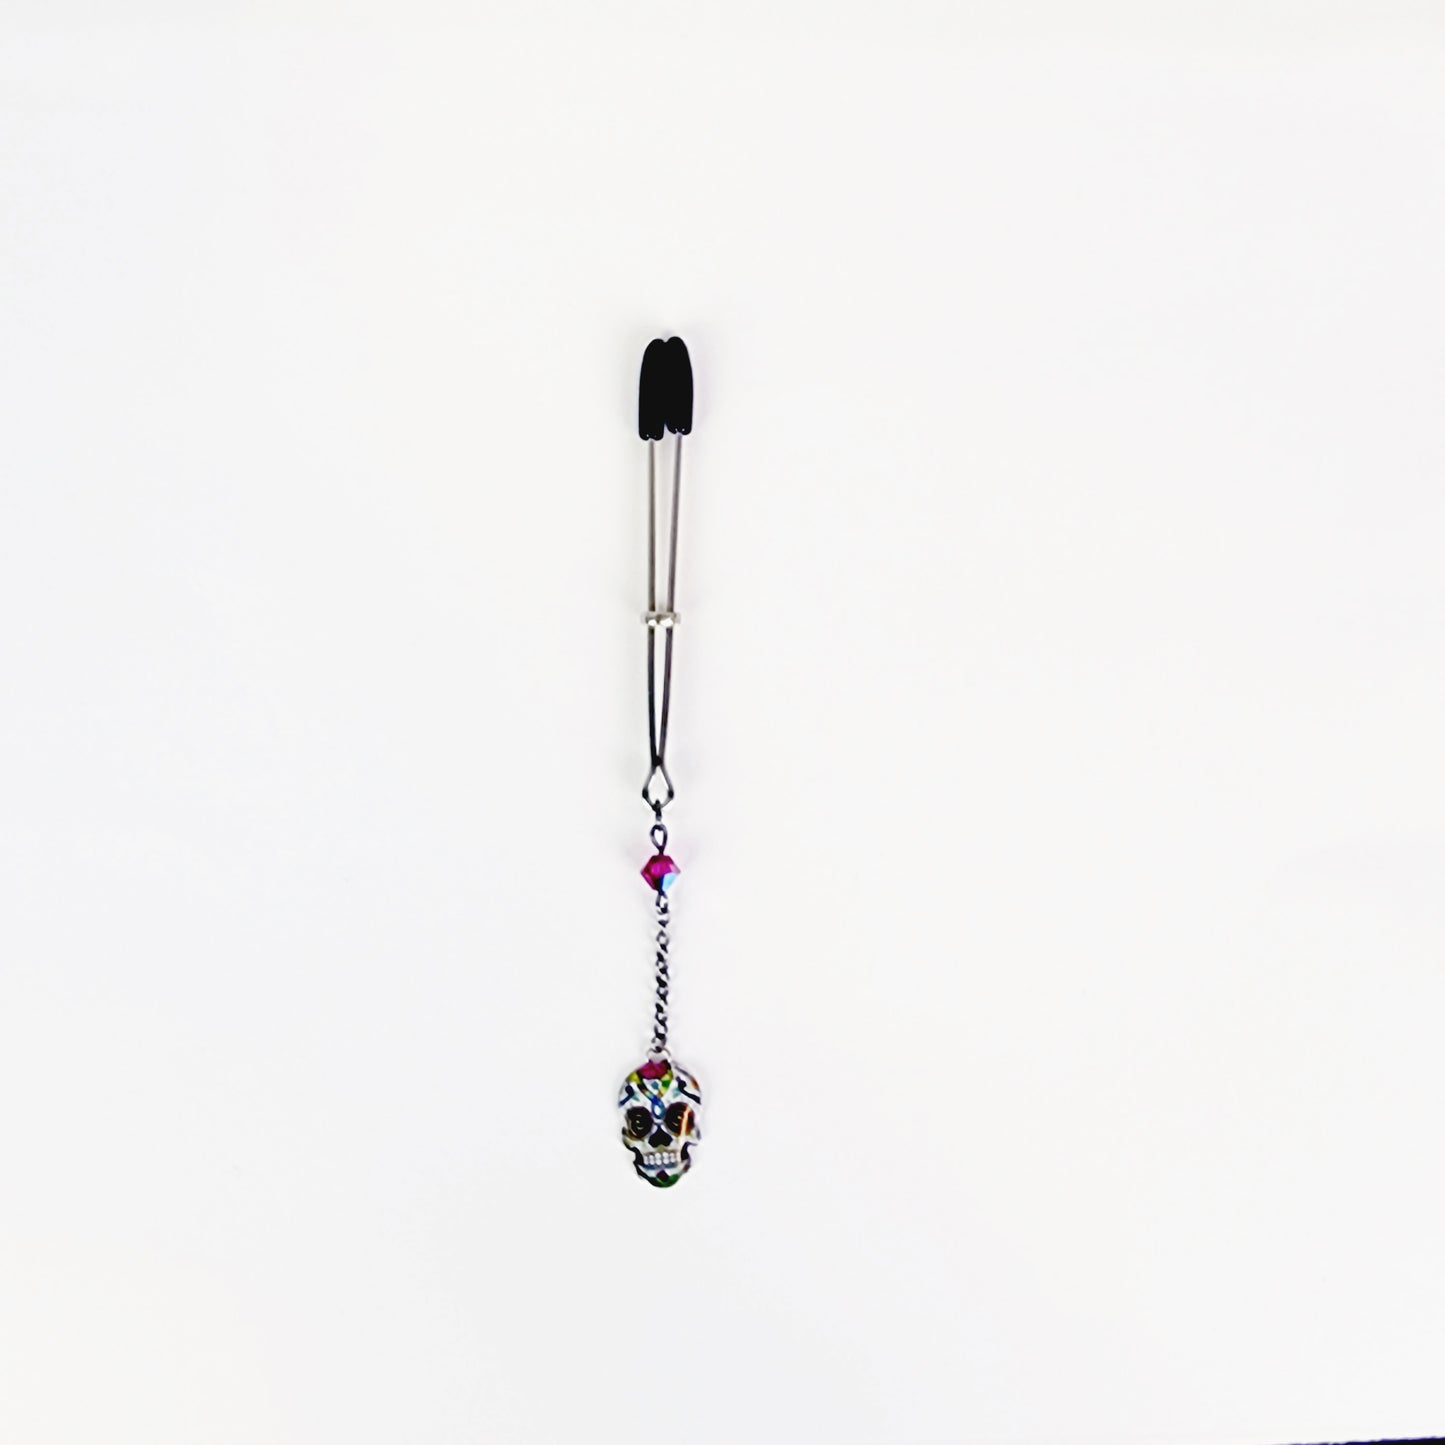 Clit Clamp with Sugar Skull Dangle. Tweezer Clitoral Clamp. Submissive, MATURE, BDSM